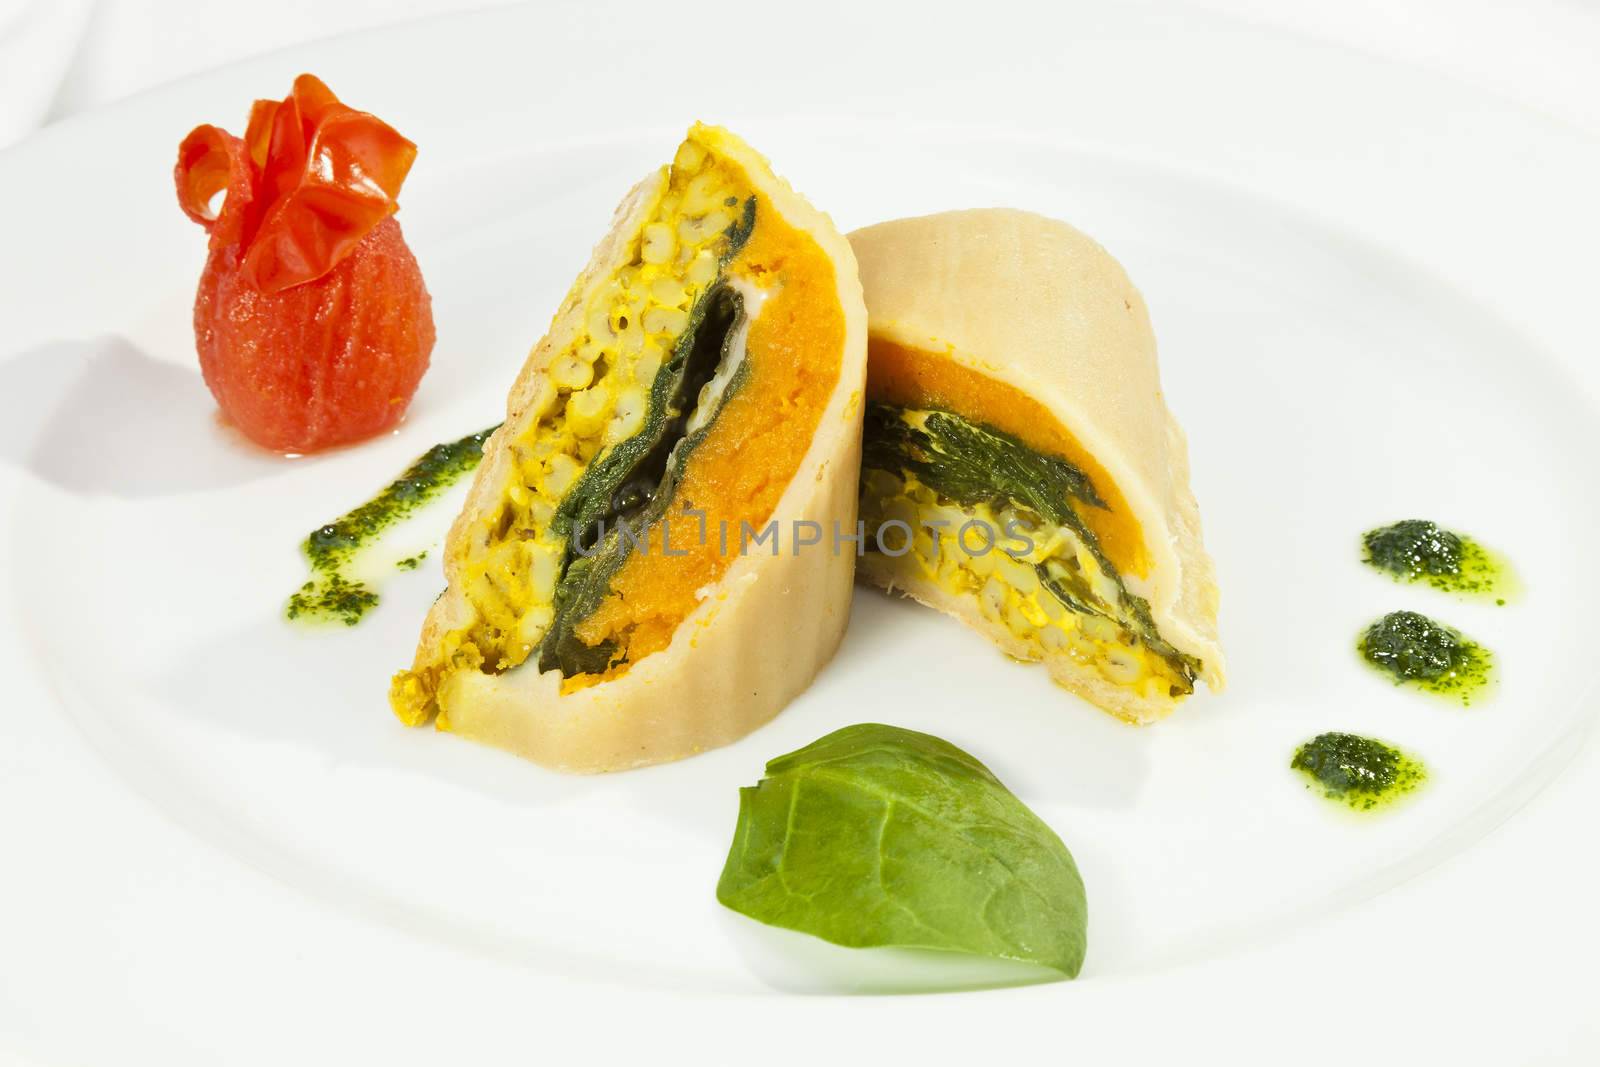 Potato roulade with spinach, carrot and curry rice by hanusst